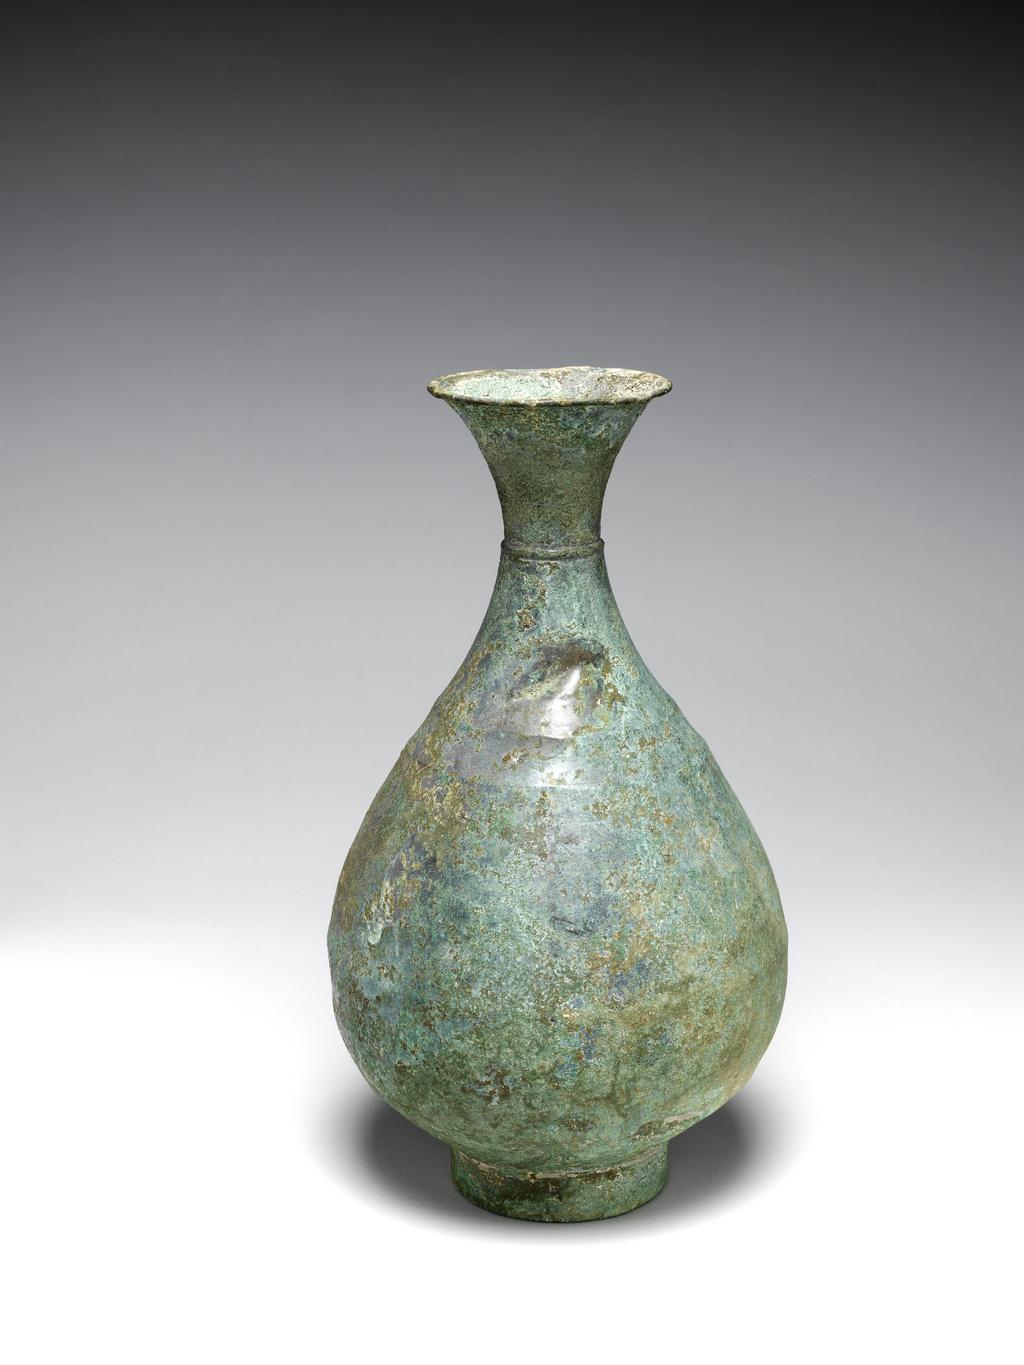 An image of Vessel. A pear-shaped vase with elegant flaring mouth, a slight ridge-collar at narrowest part on cylinder. Foot rim of bronze, green patinated over silvery surface. Circa 935-1392. Korean.